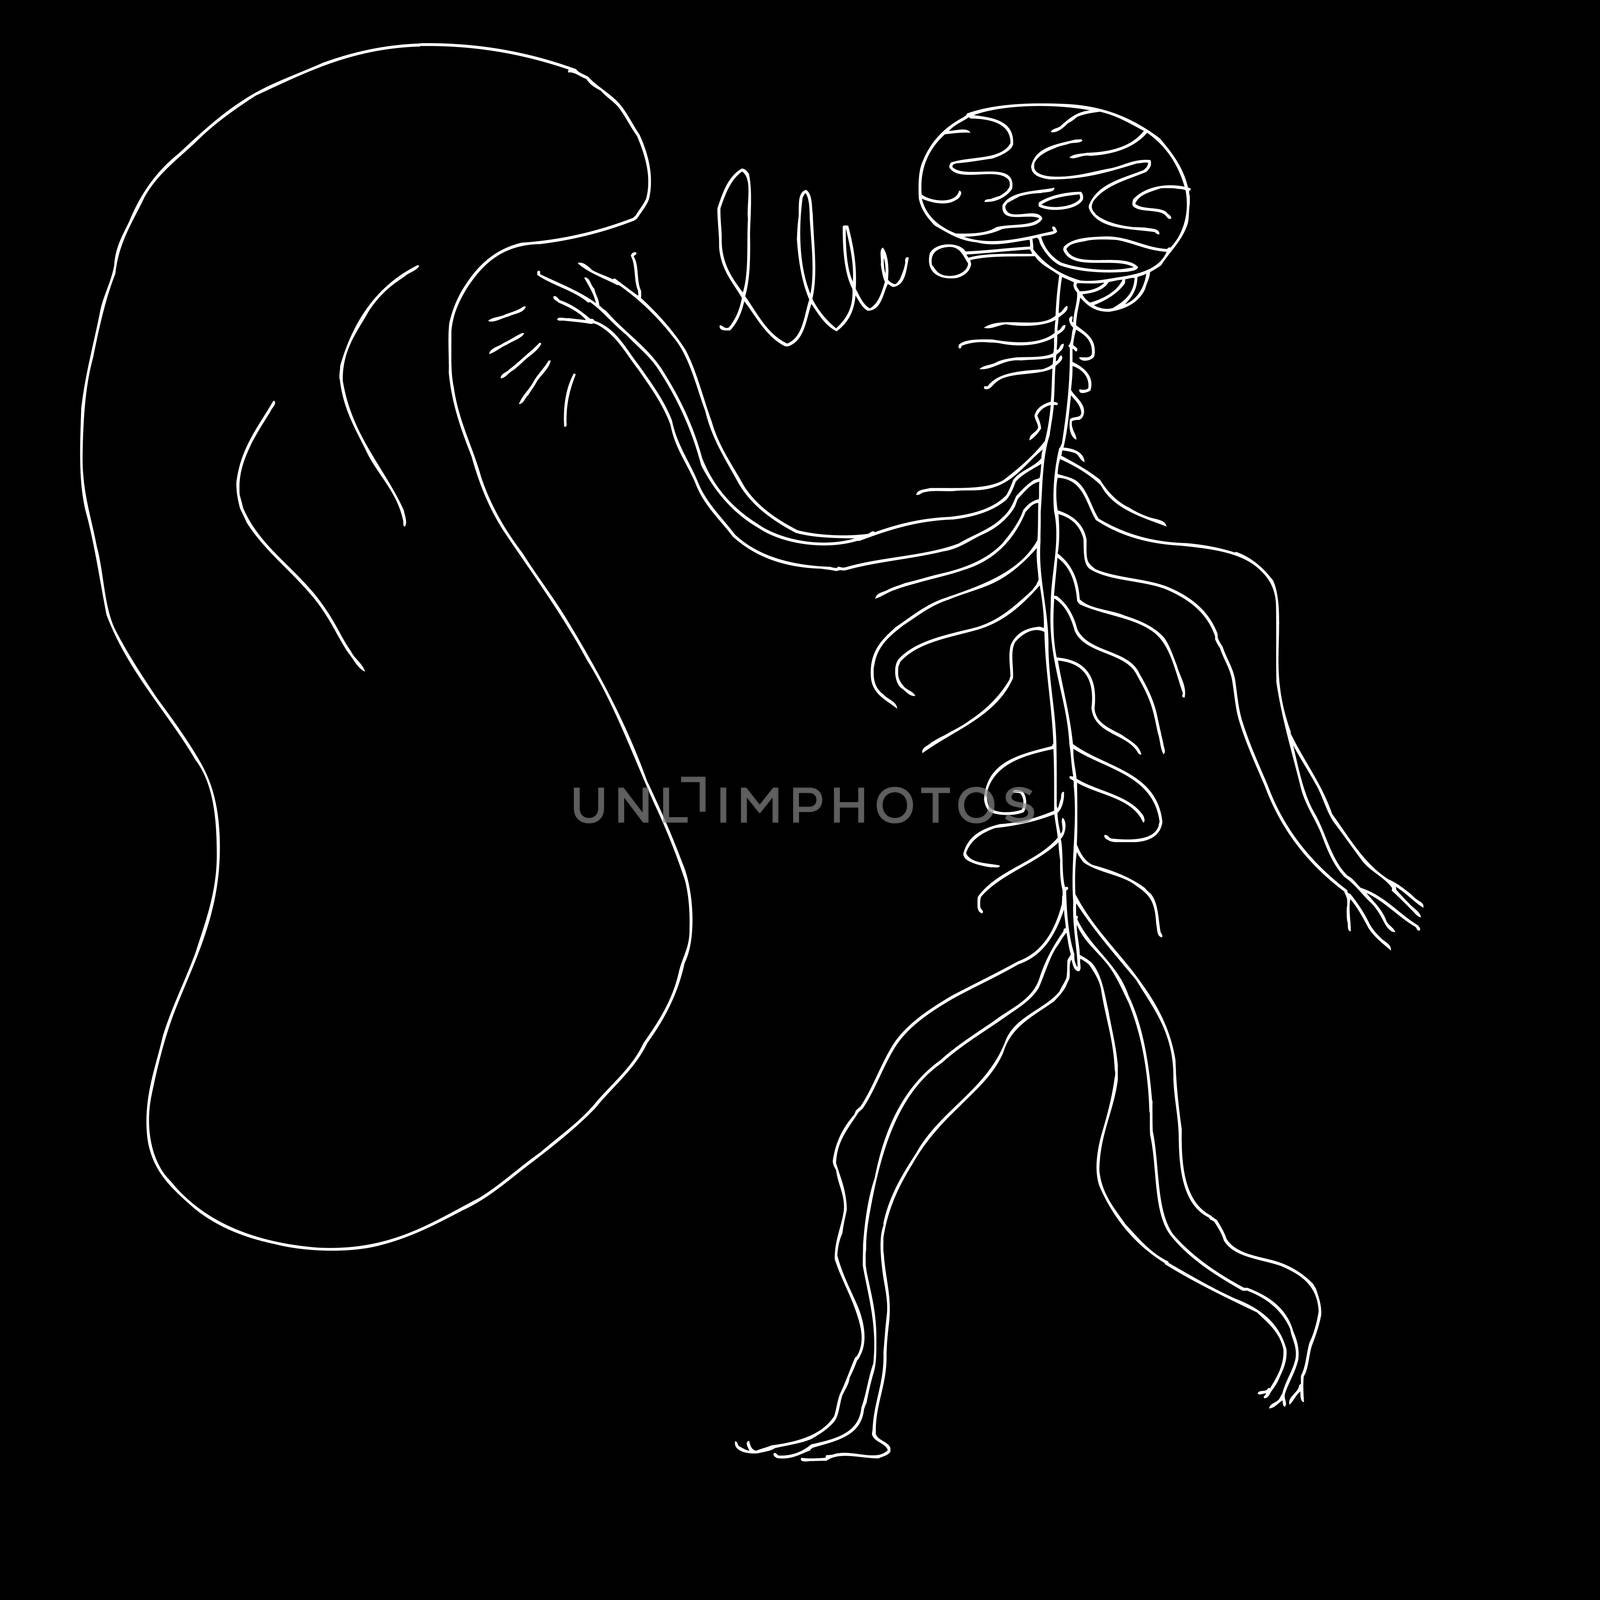 Abstract human nervous system reaching for soft object